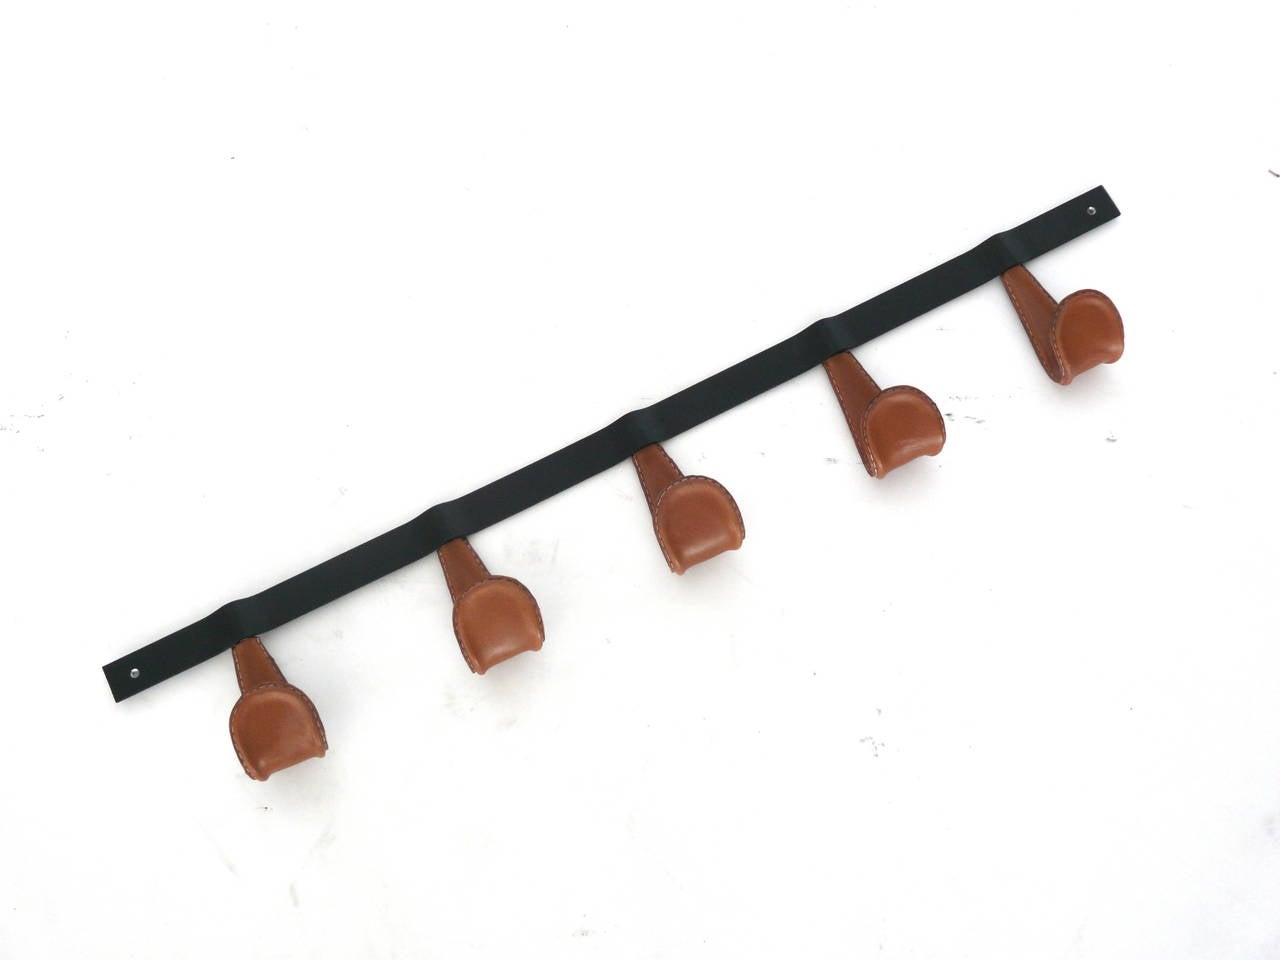 Newly produced iron and leather coat rack. Iron hooks wrapped in saddle brown leather with contrast stitching. Leather options available.